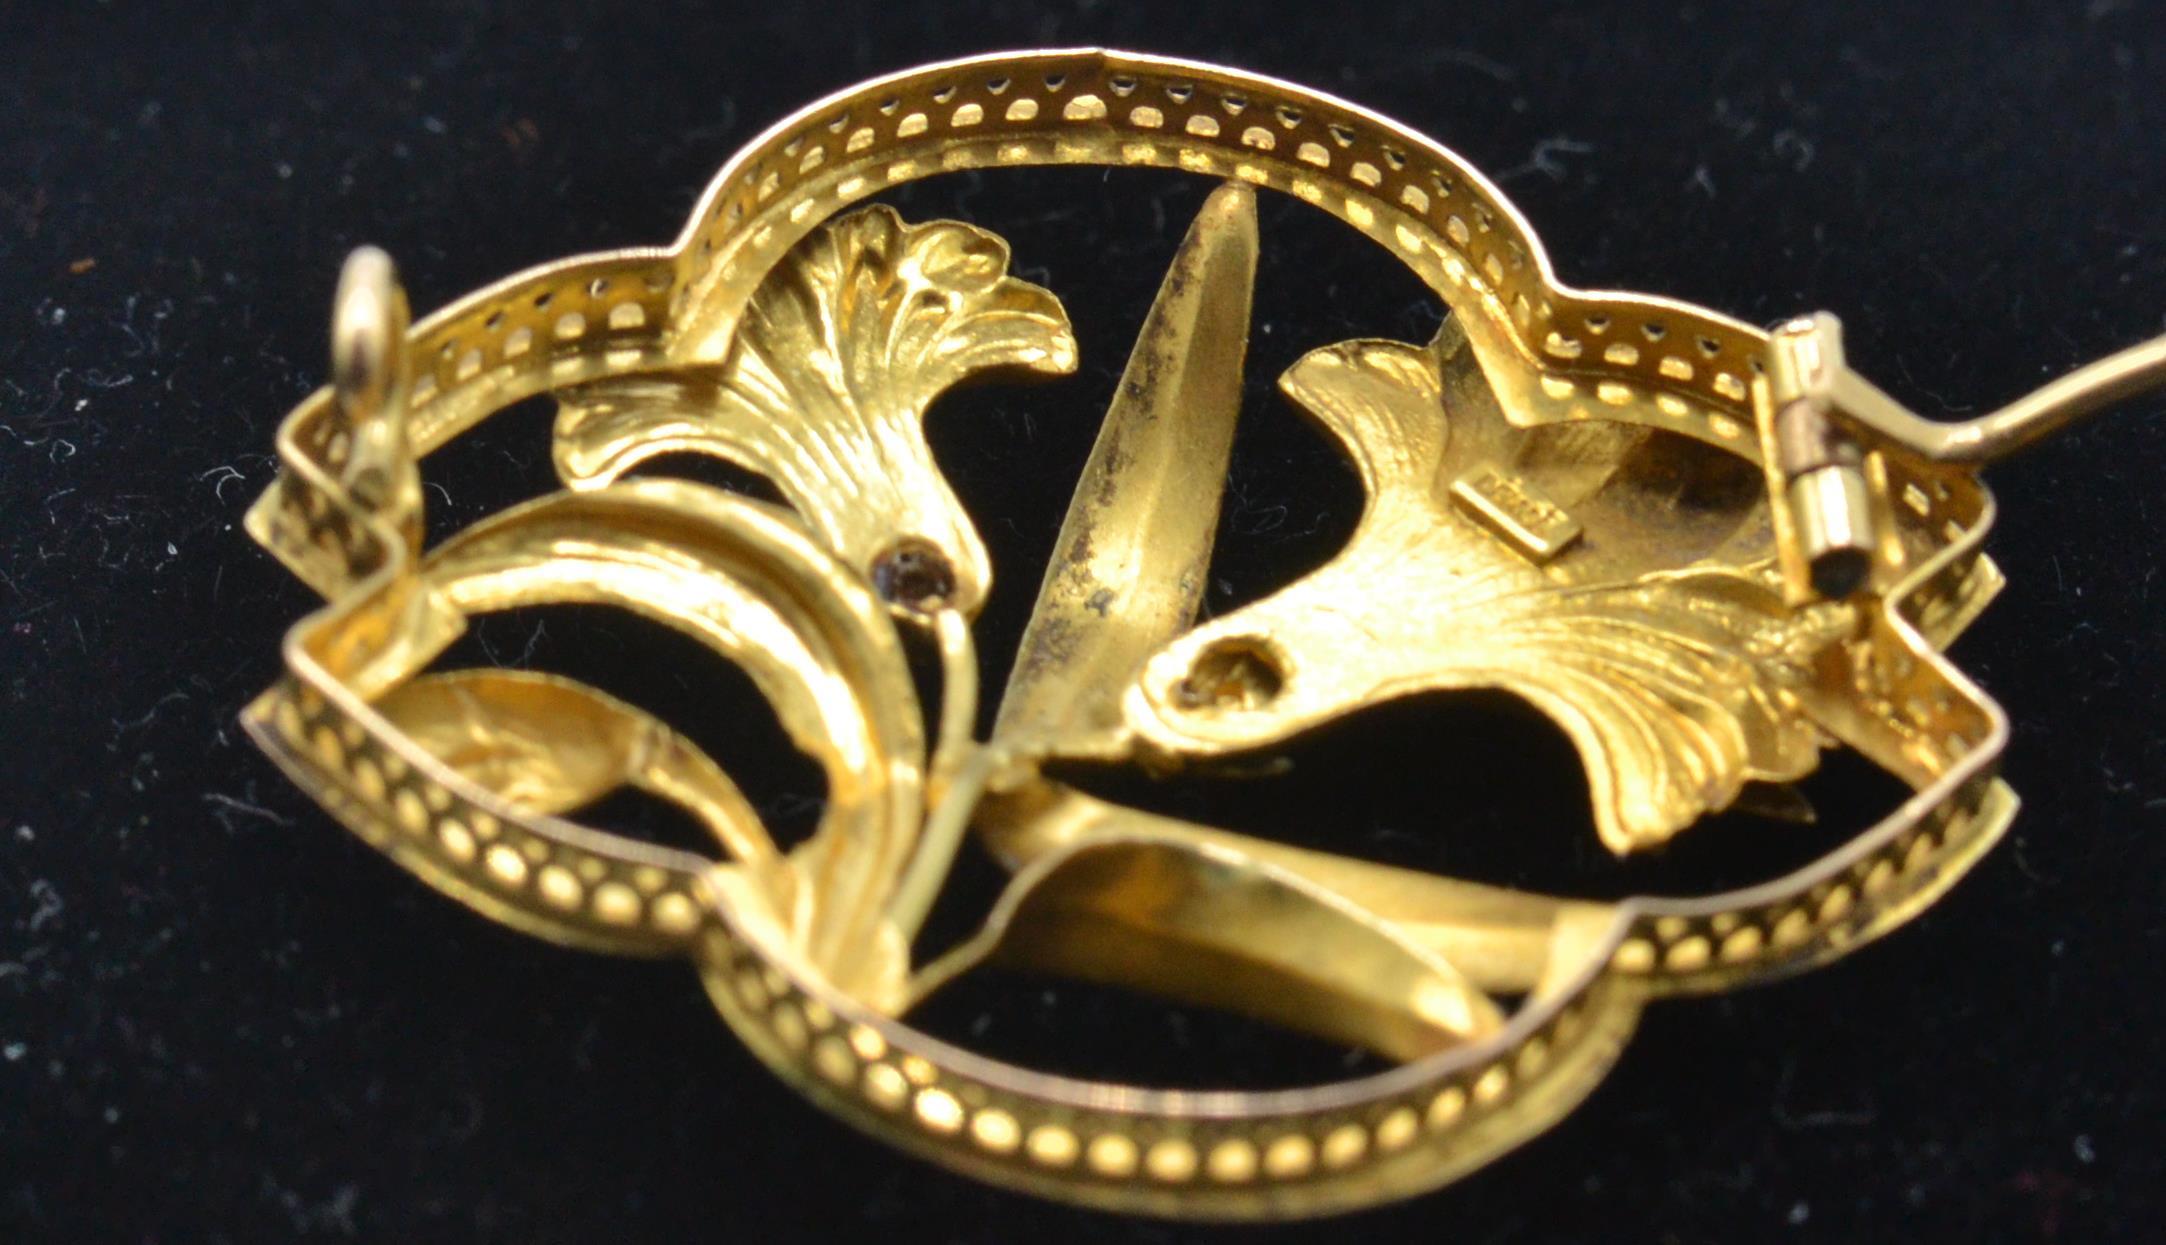 A French Art Nouveau gold and diamond brooch pin - Image 4 of 4